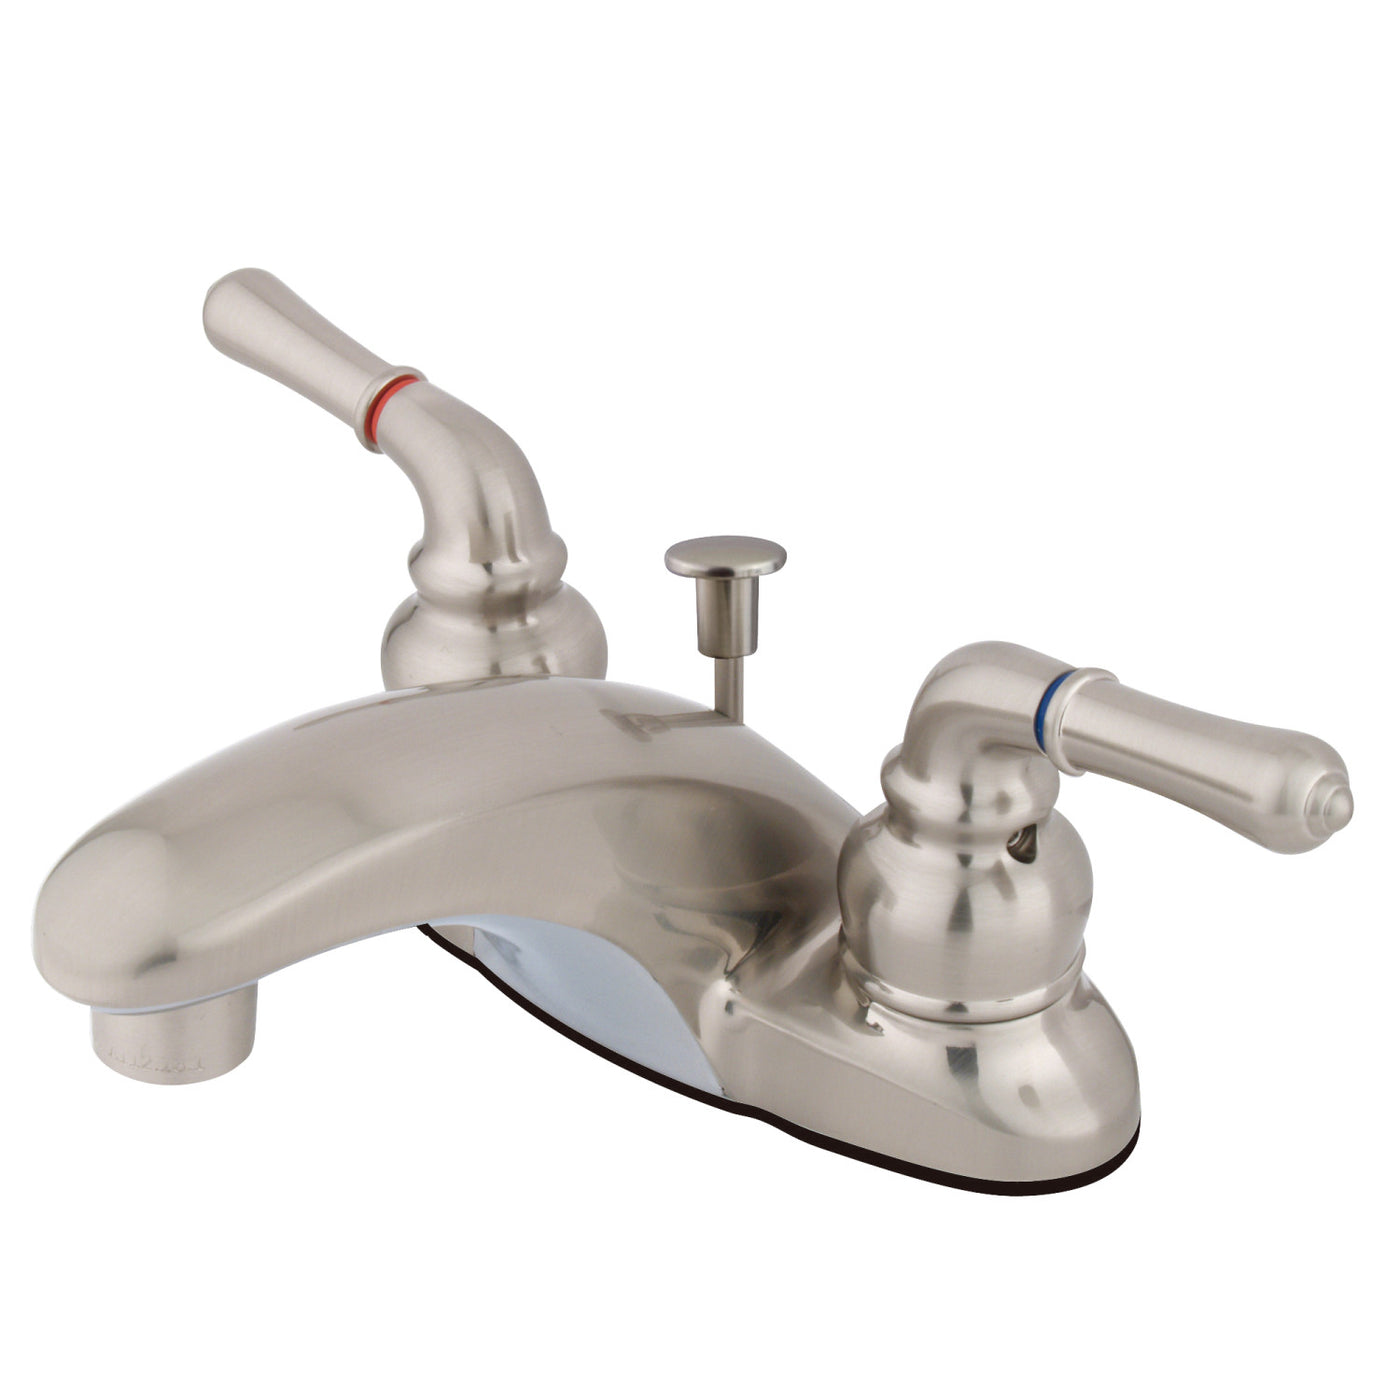 Elements of Design EB628 4-Inch Centerset Bathroom Faucet, Brushed Nickel